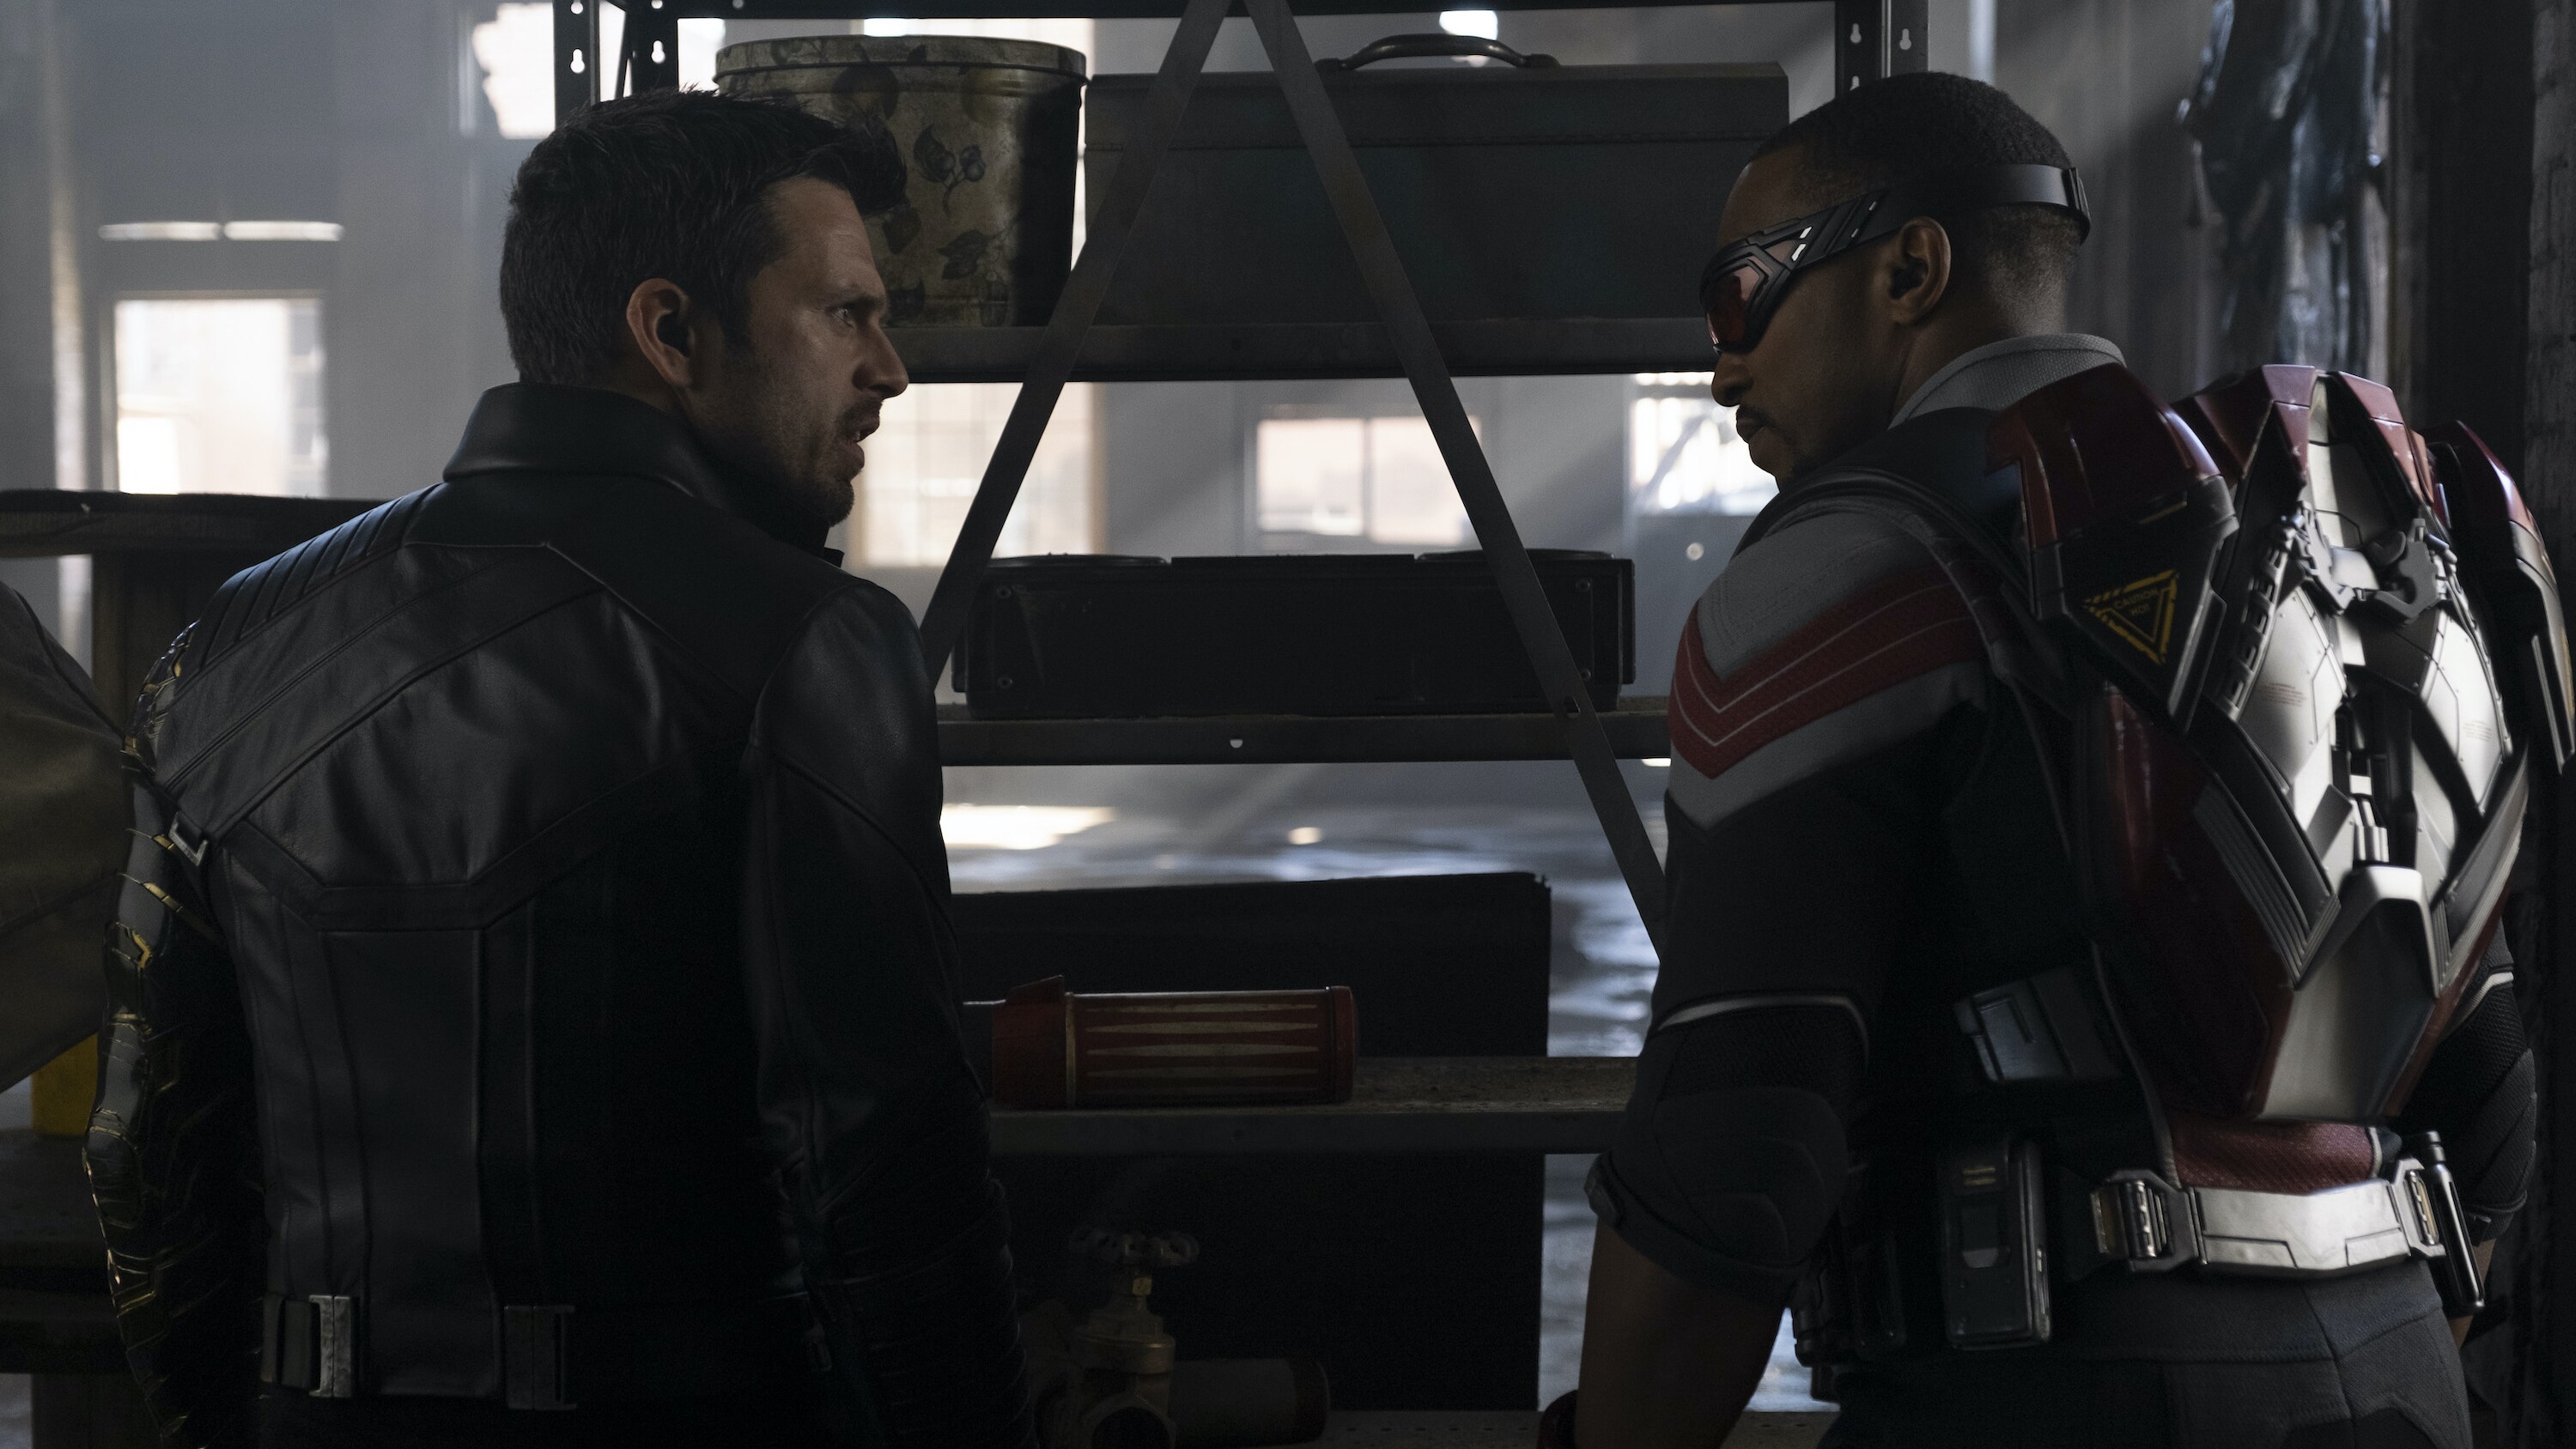 (L-R): Winter Soldier/Bucky Barnes (Sebastian Stan) and Falcon/Sam Wilson (Anthony Mackie) in Marvel Studios' THE FALCON AND THE WINTER SOLDIER exclusively on Disney+. Photo by Chuck Zlotnick. ©Marvel Studios 2020. All Rights Reserved.